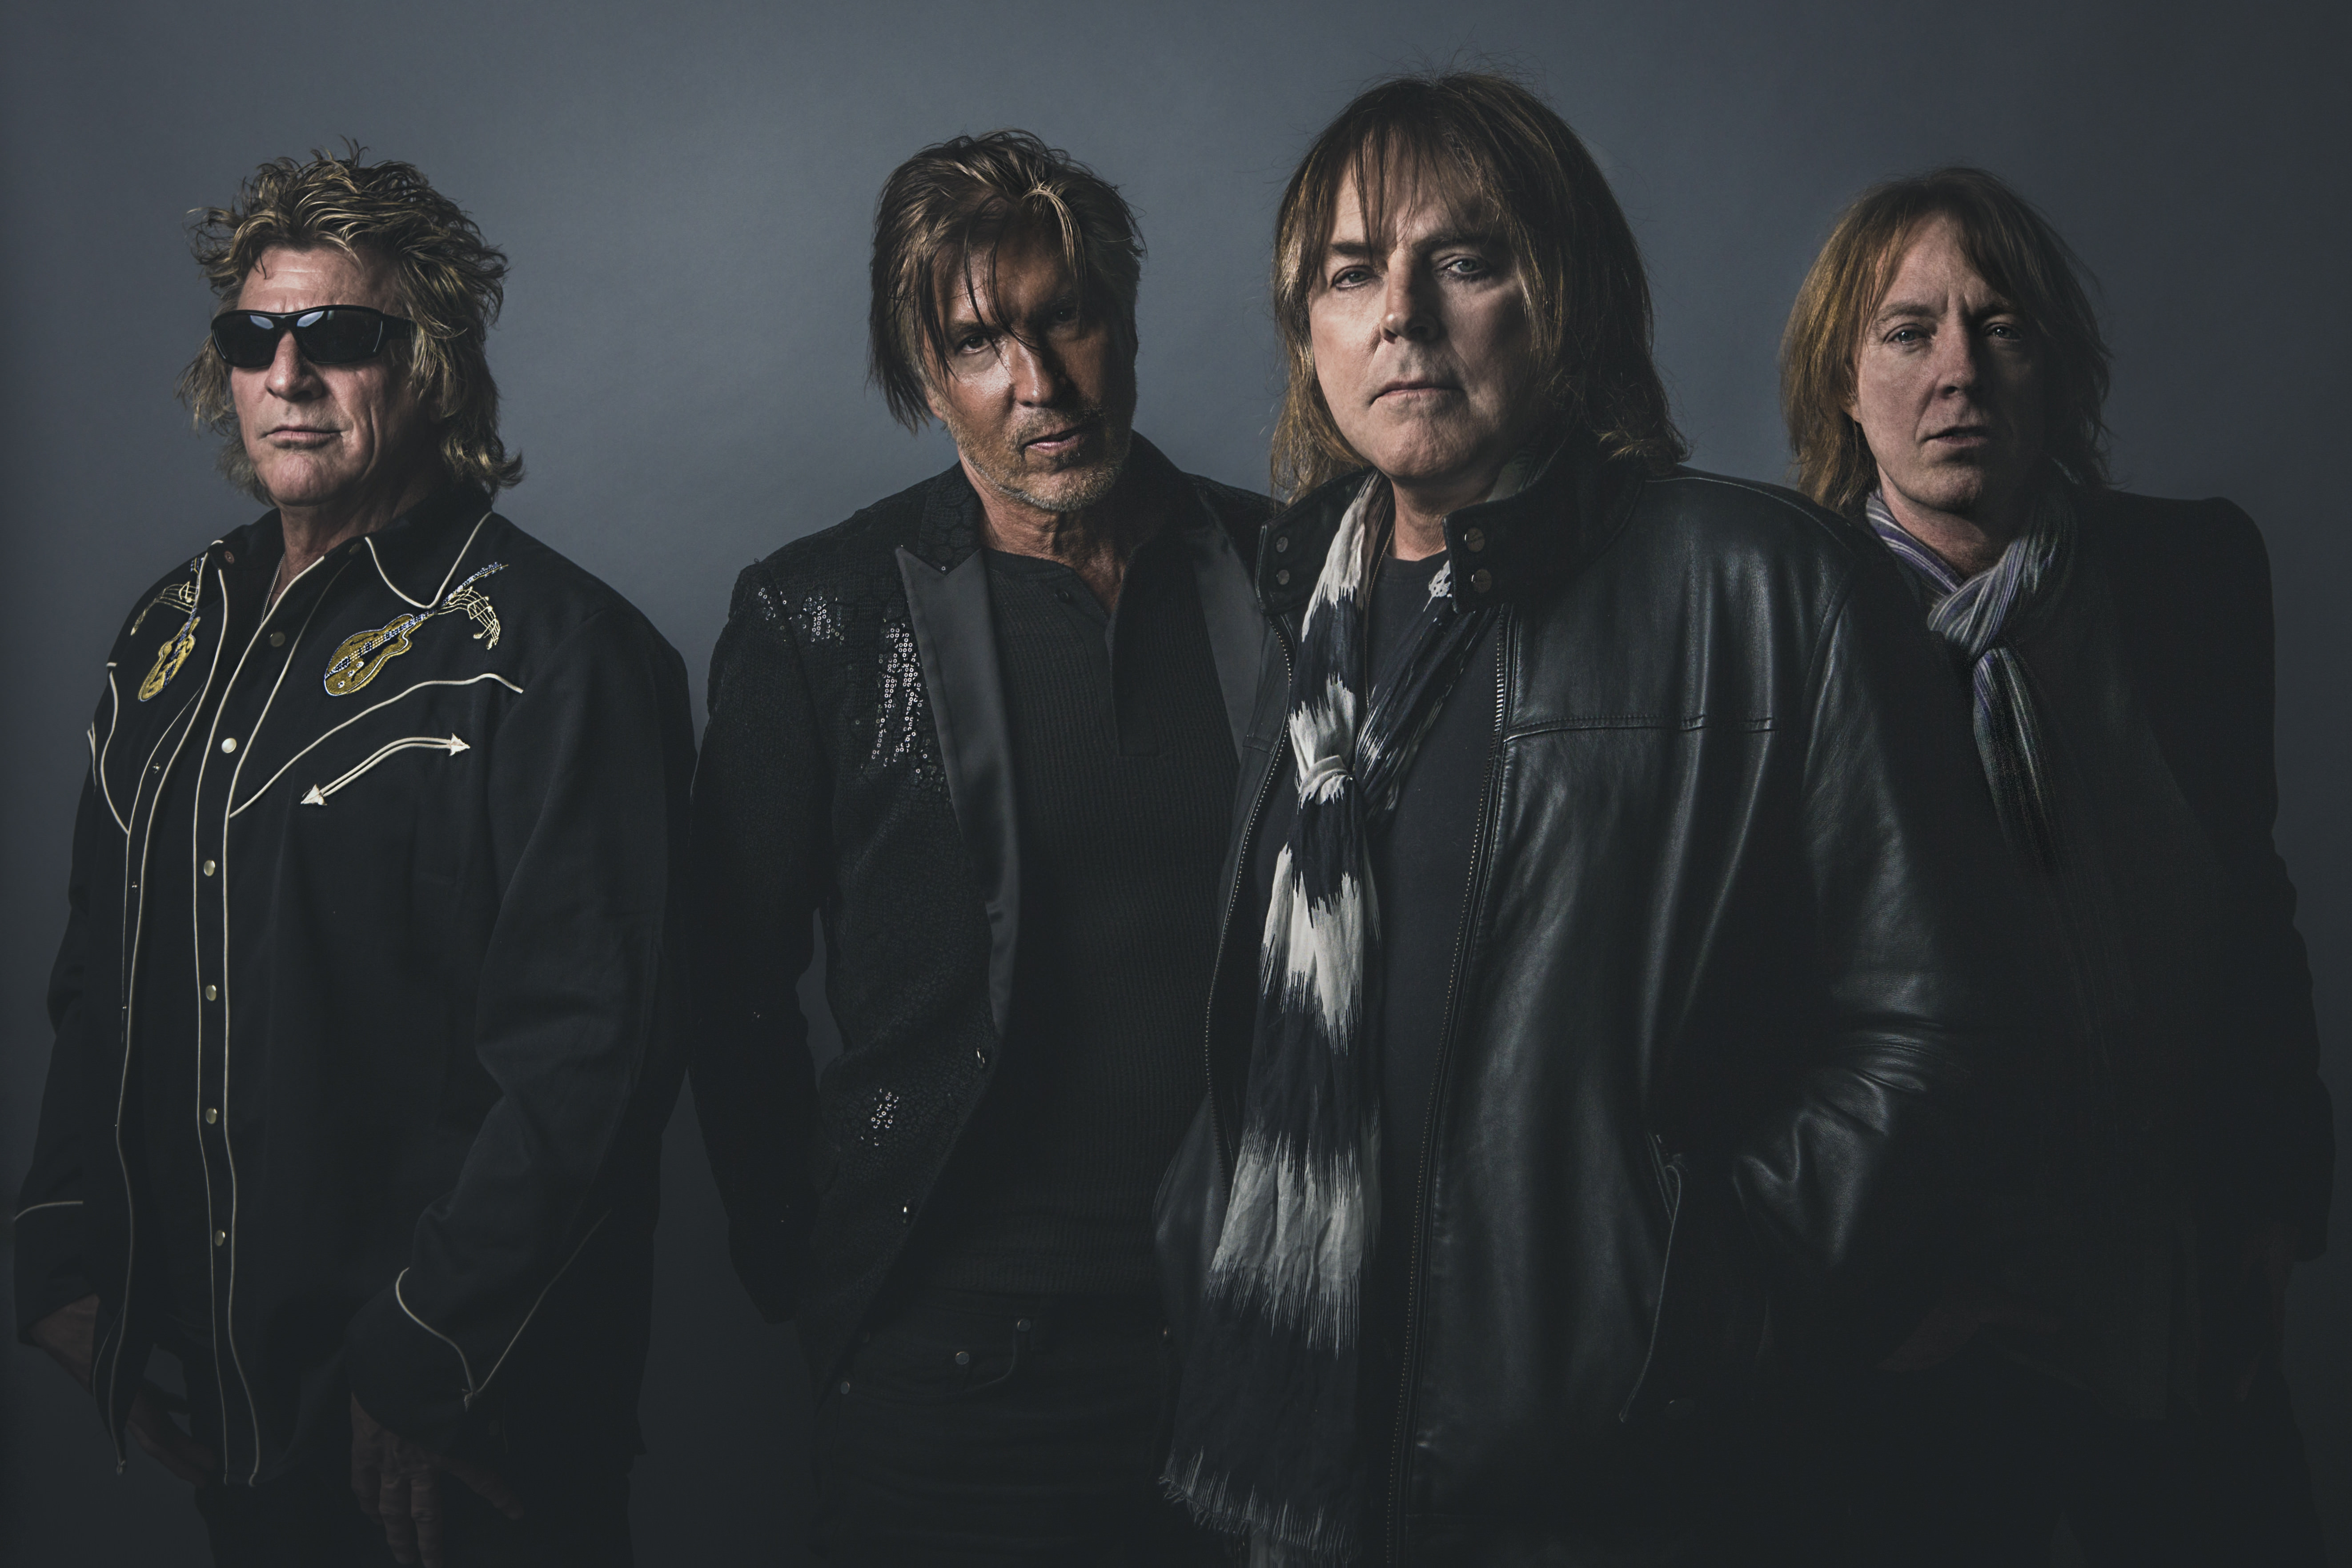 Original DOKKEN Lineup Release Video For New Single "It's Just Another Day"